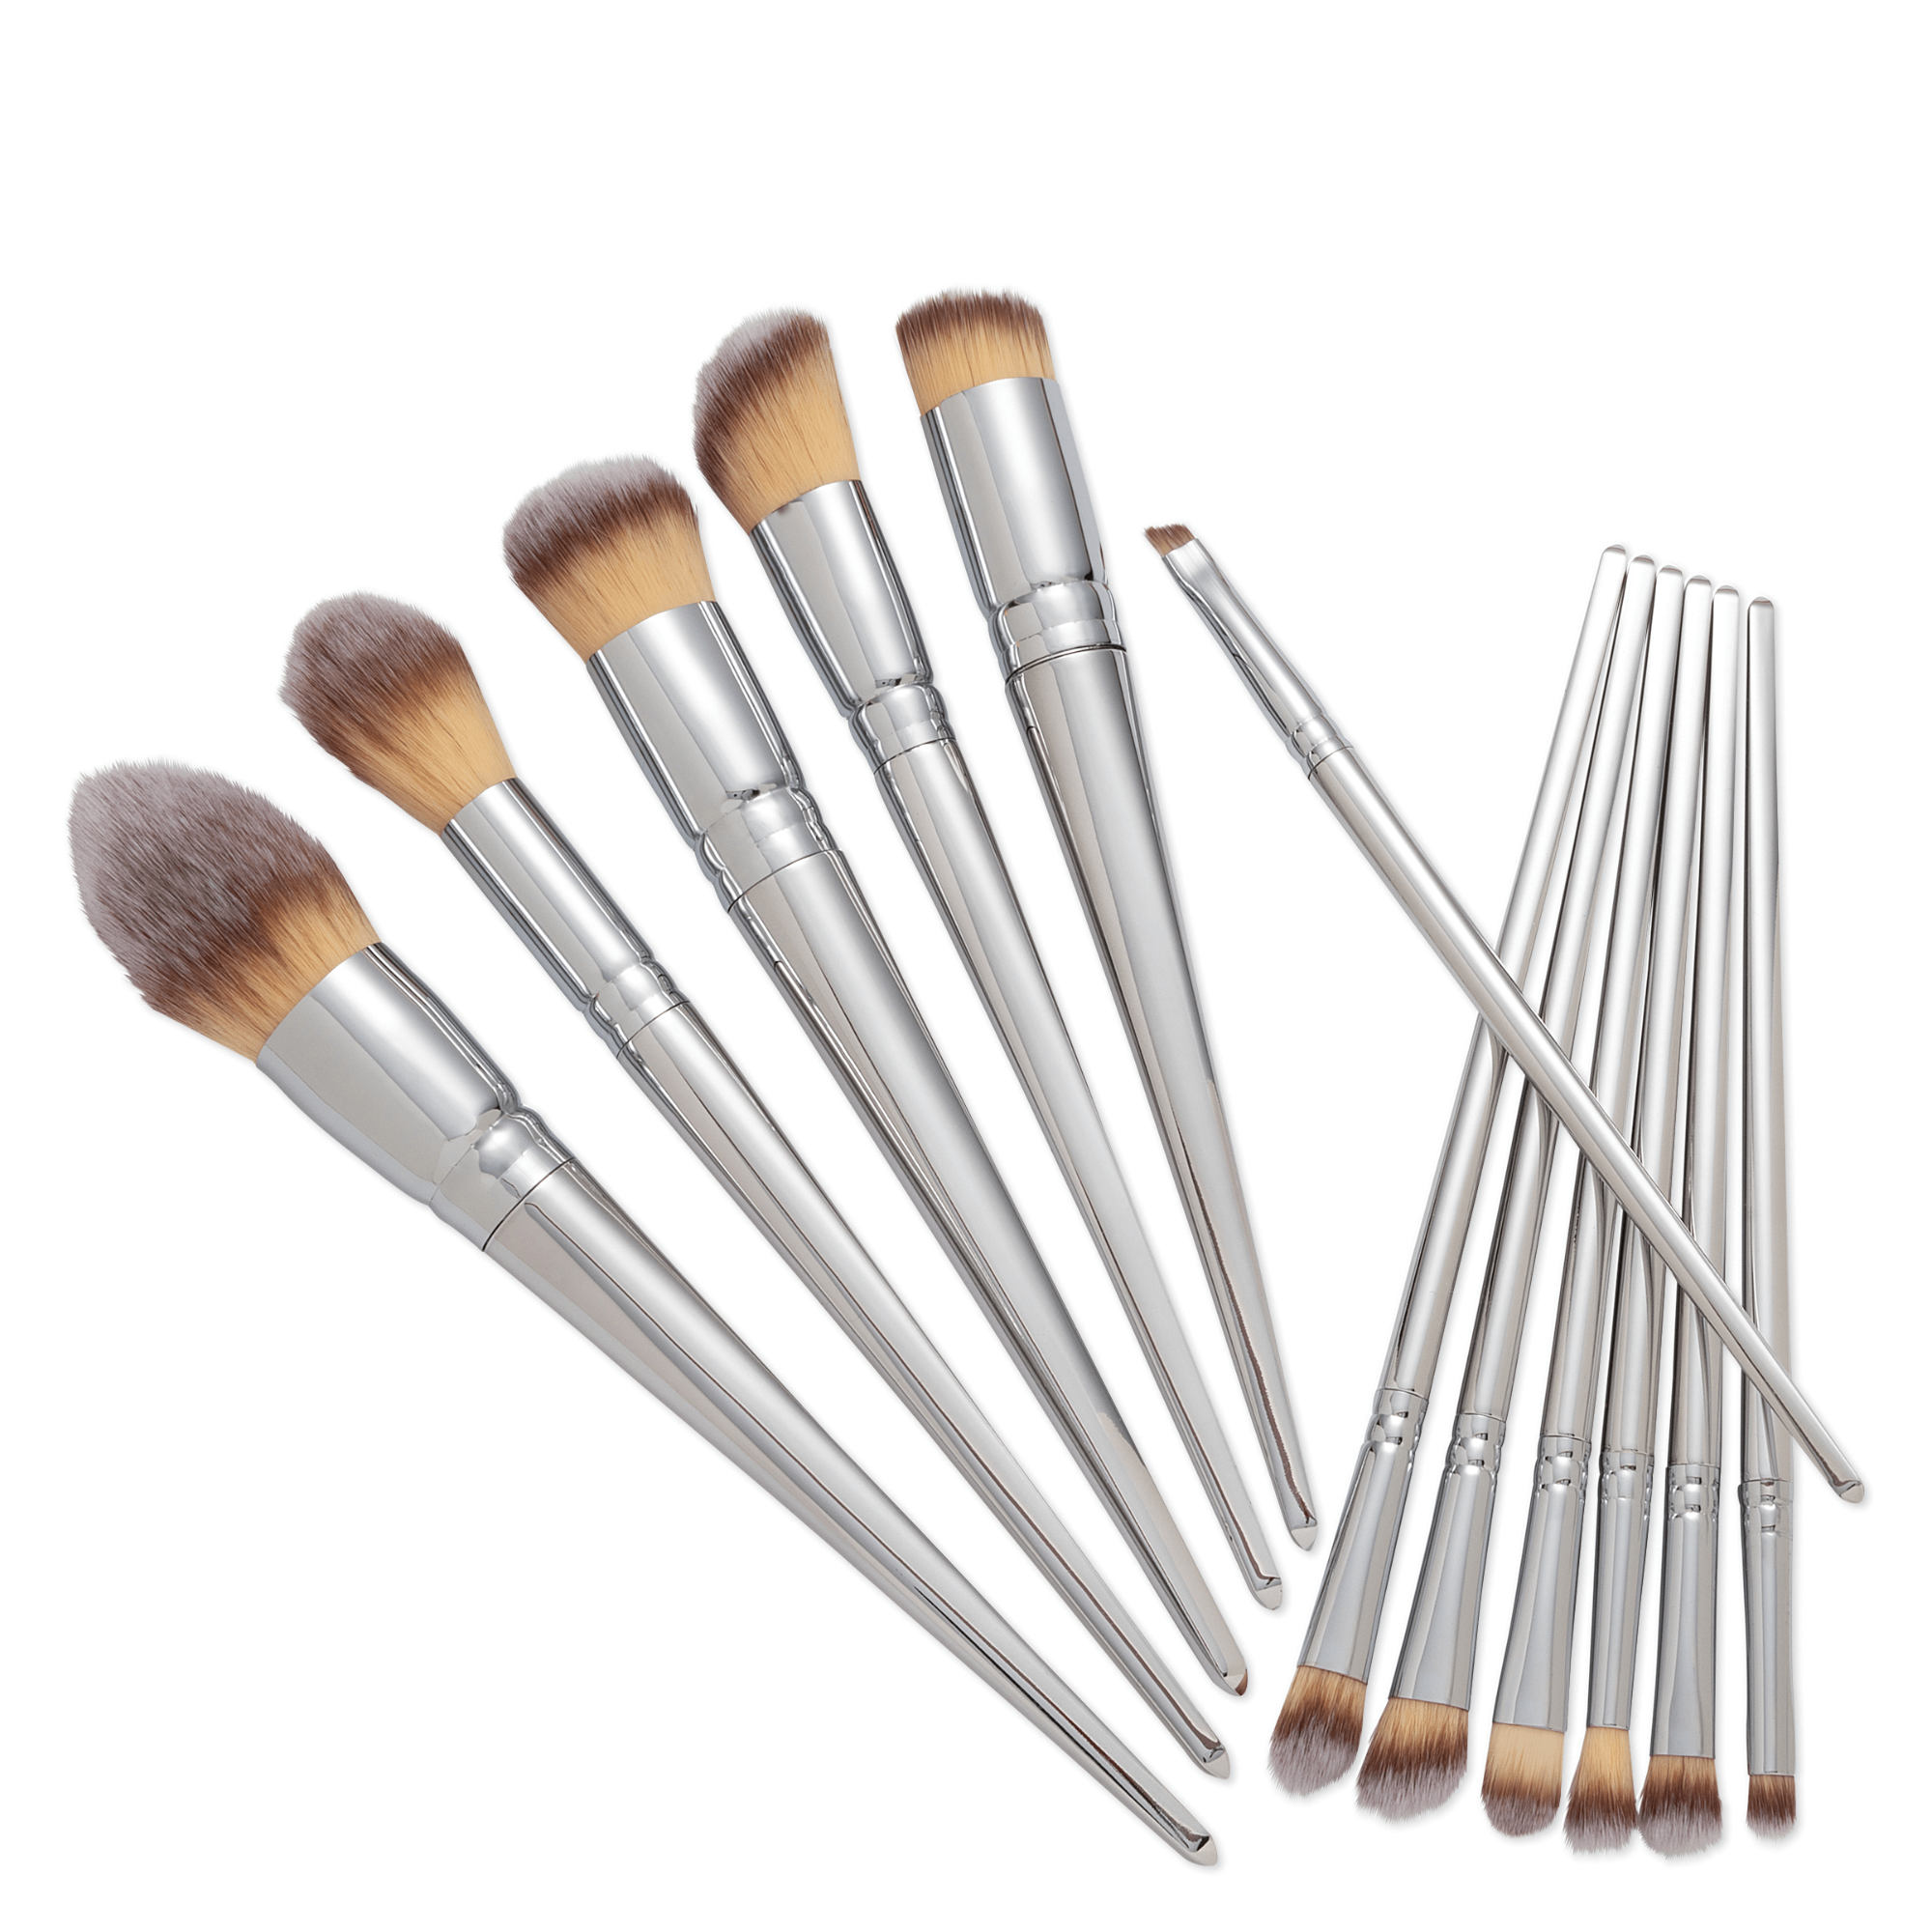 Ultra-Soft Synthetic Makeup Brush Set with Case